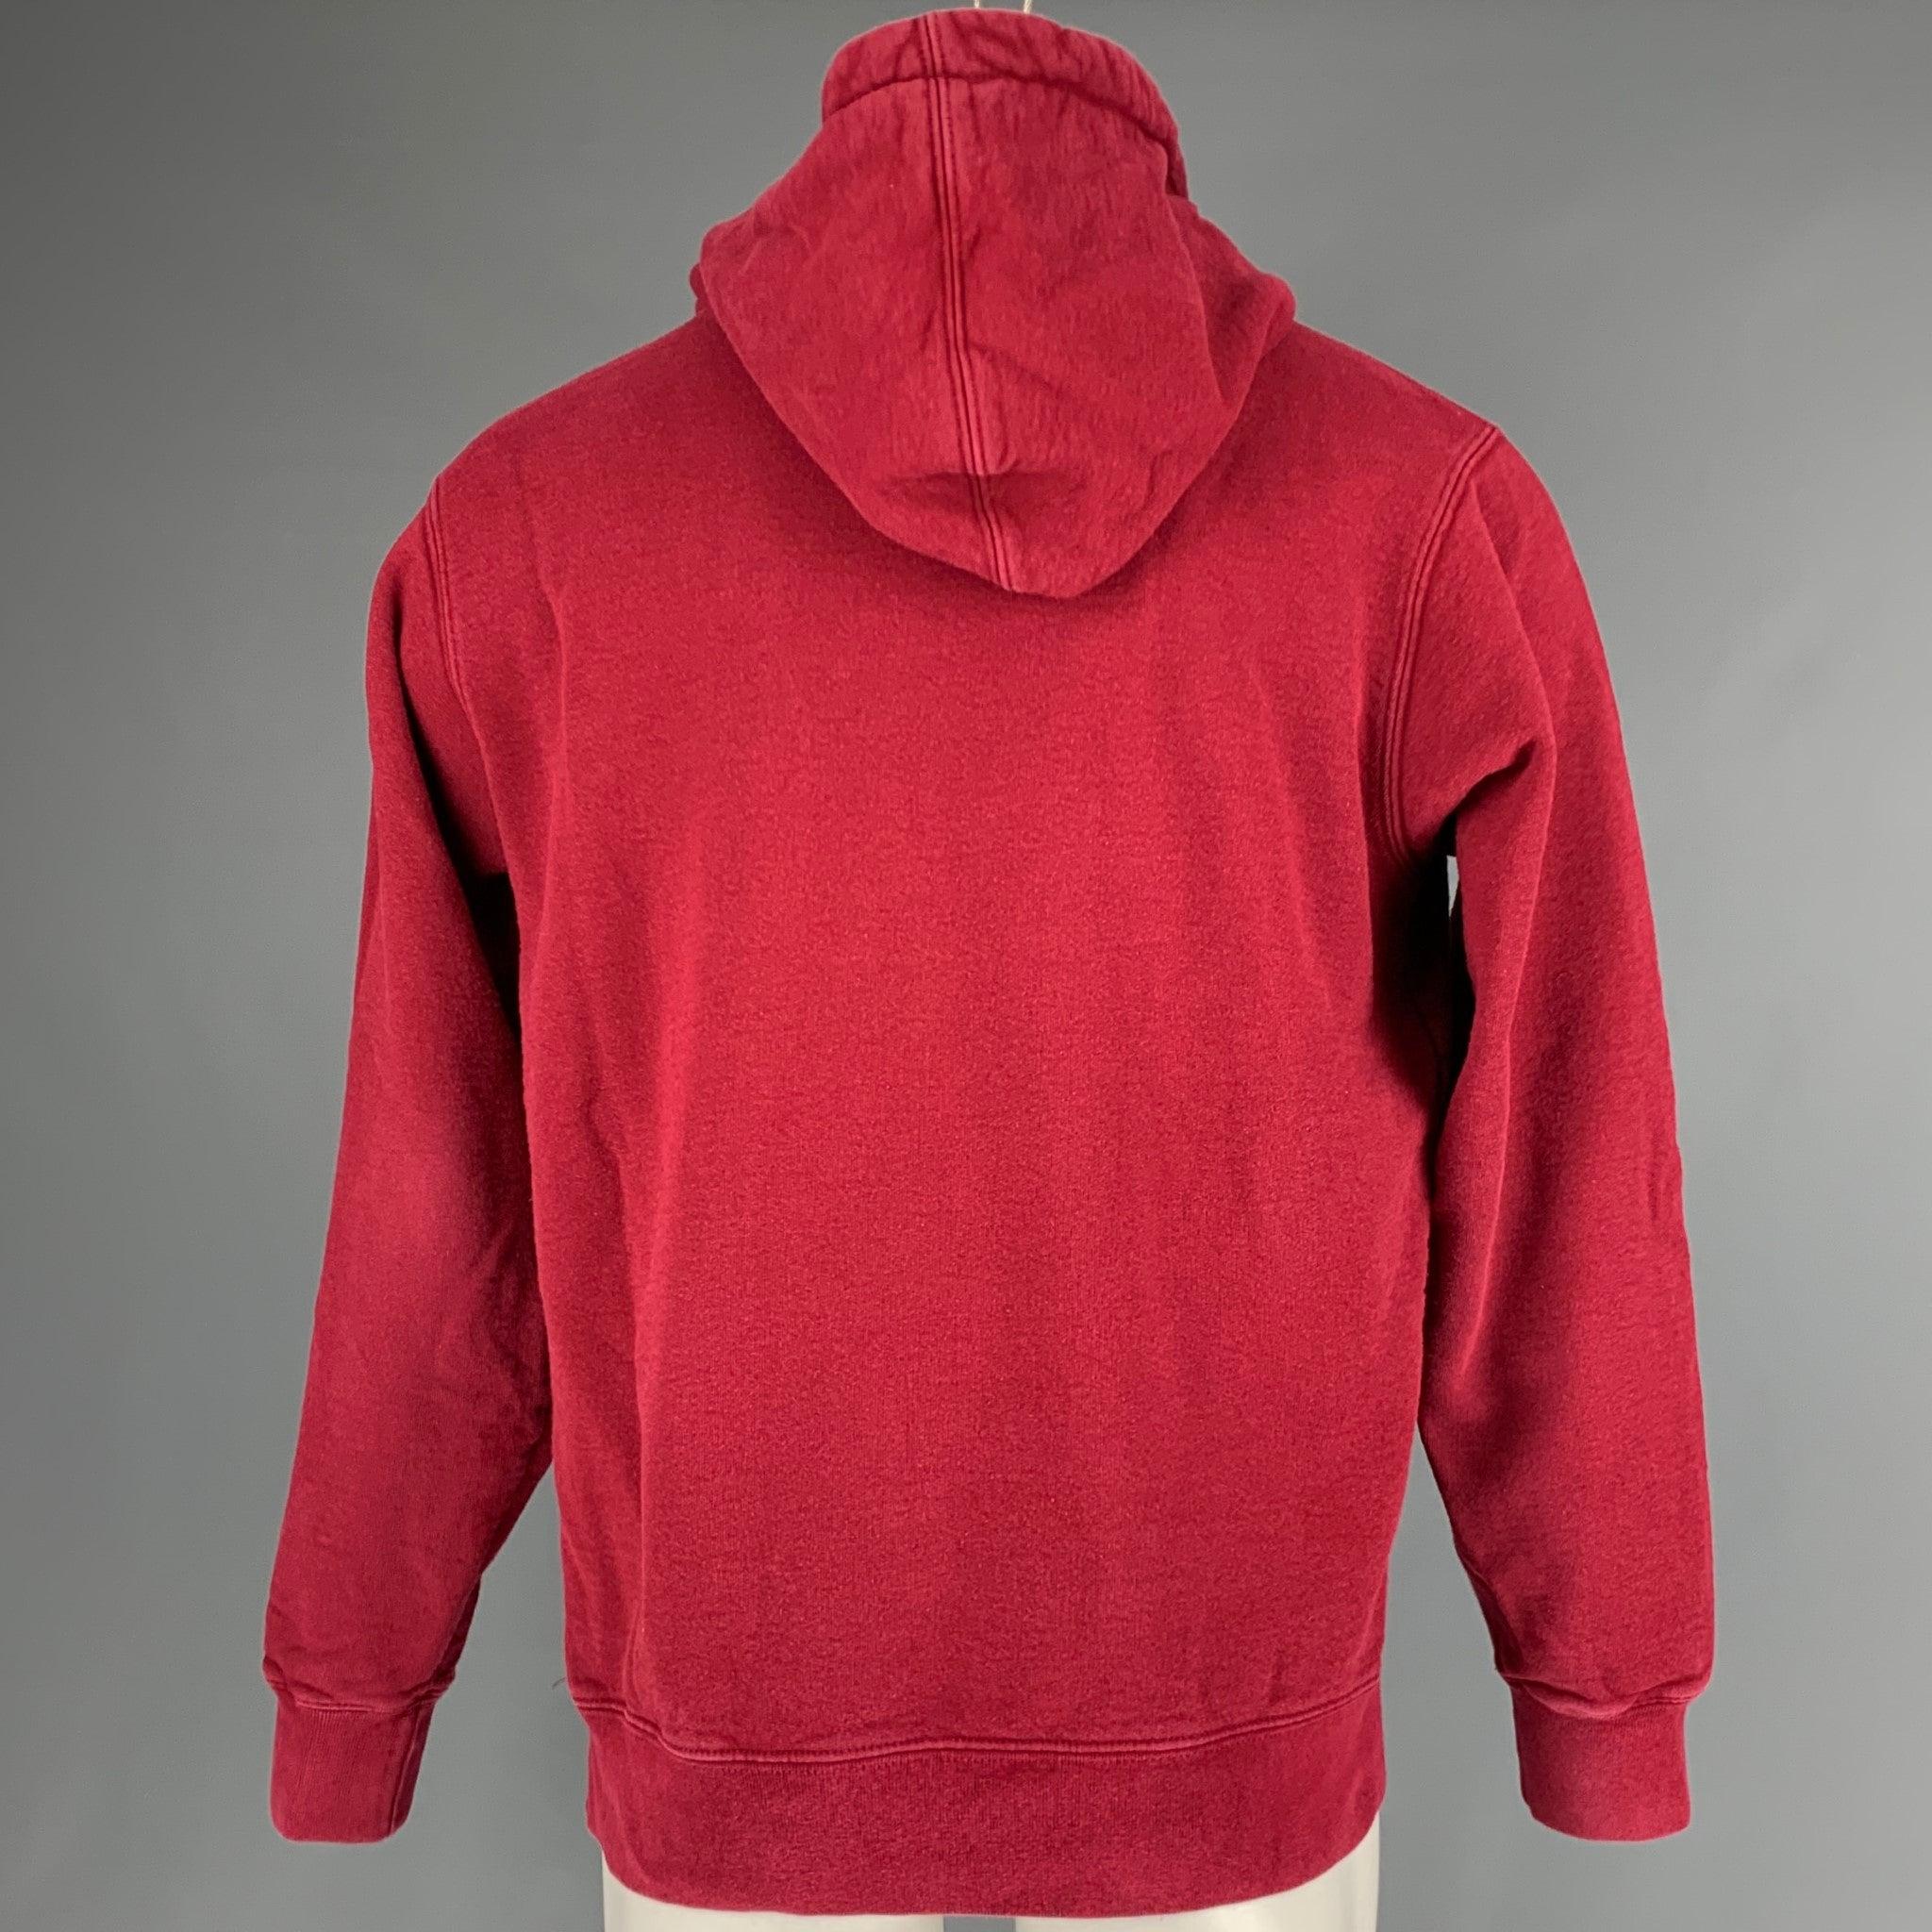 Men's SUPREME Size M Burgundy Gold Embroidery Cotton Hoodie Sweatshirt For Sale